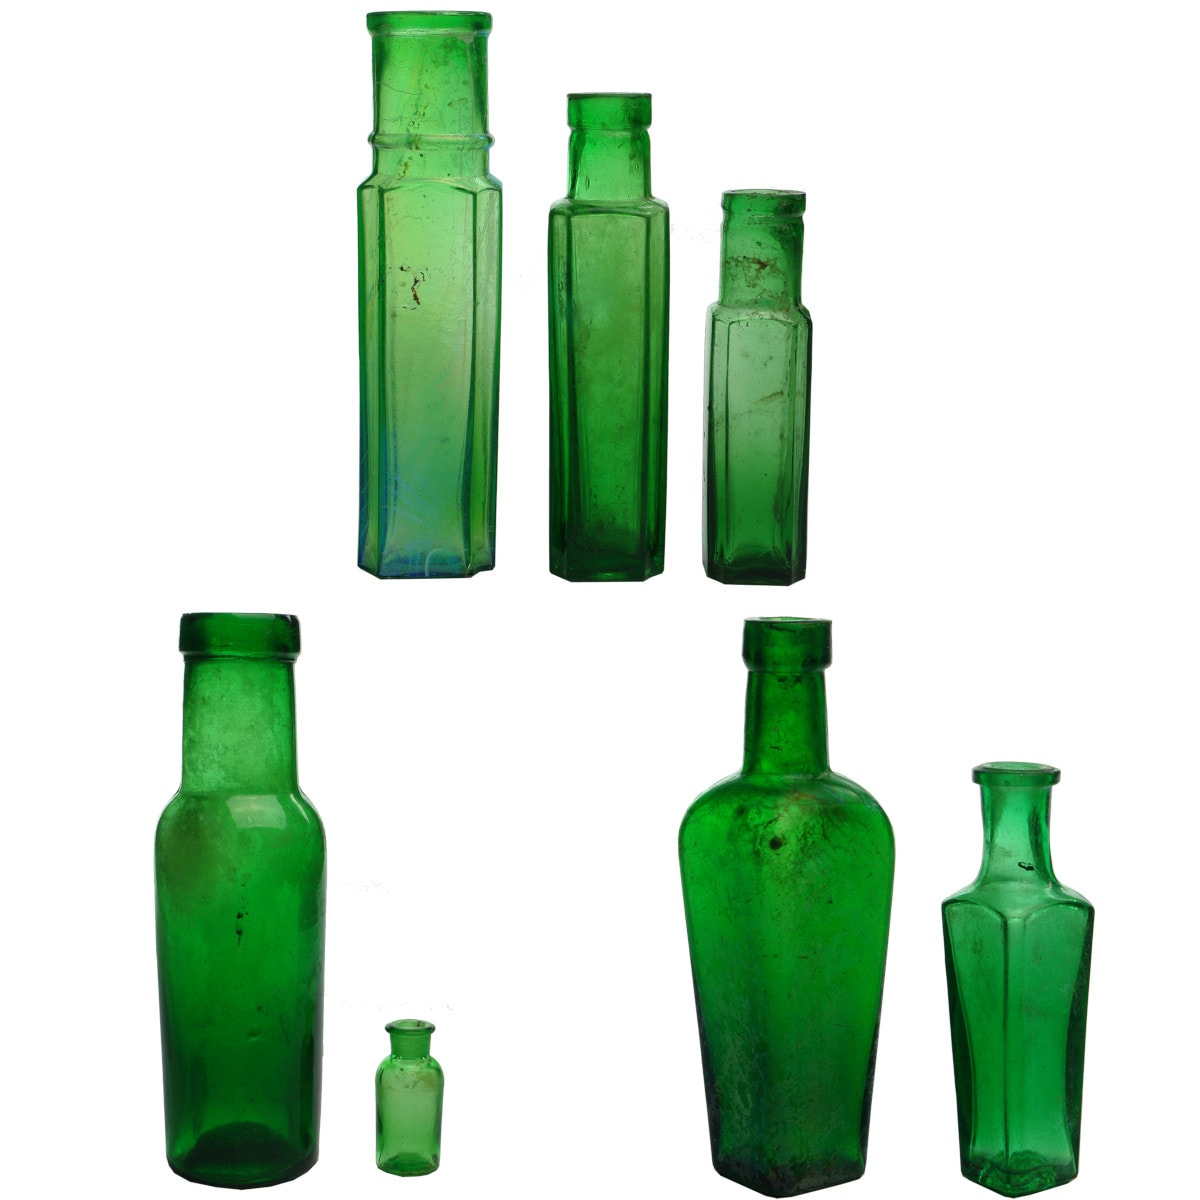 Seven Green Bottles. Capers, Herbs & Perfumes.